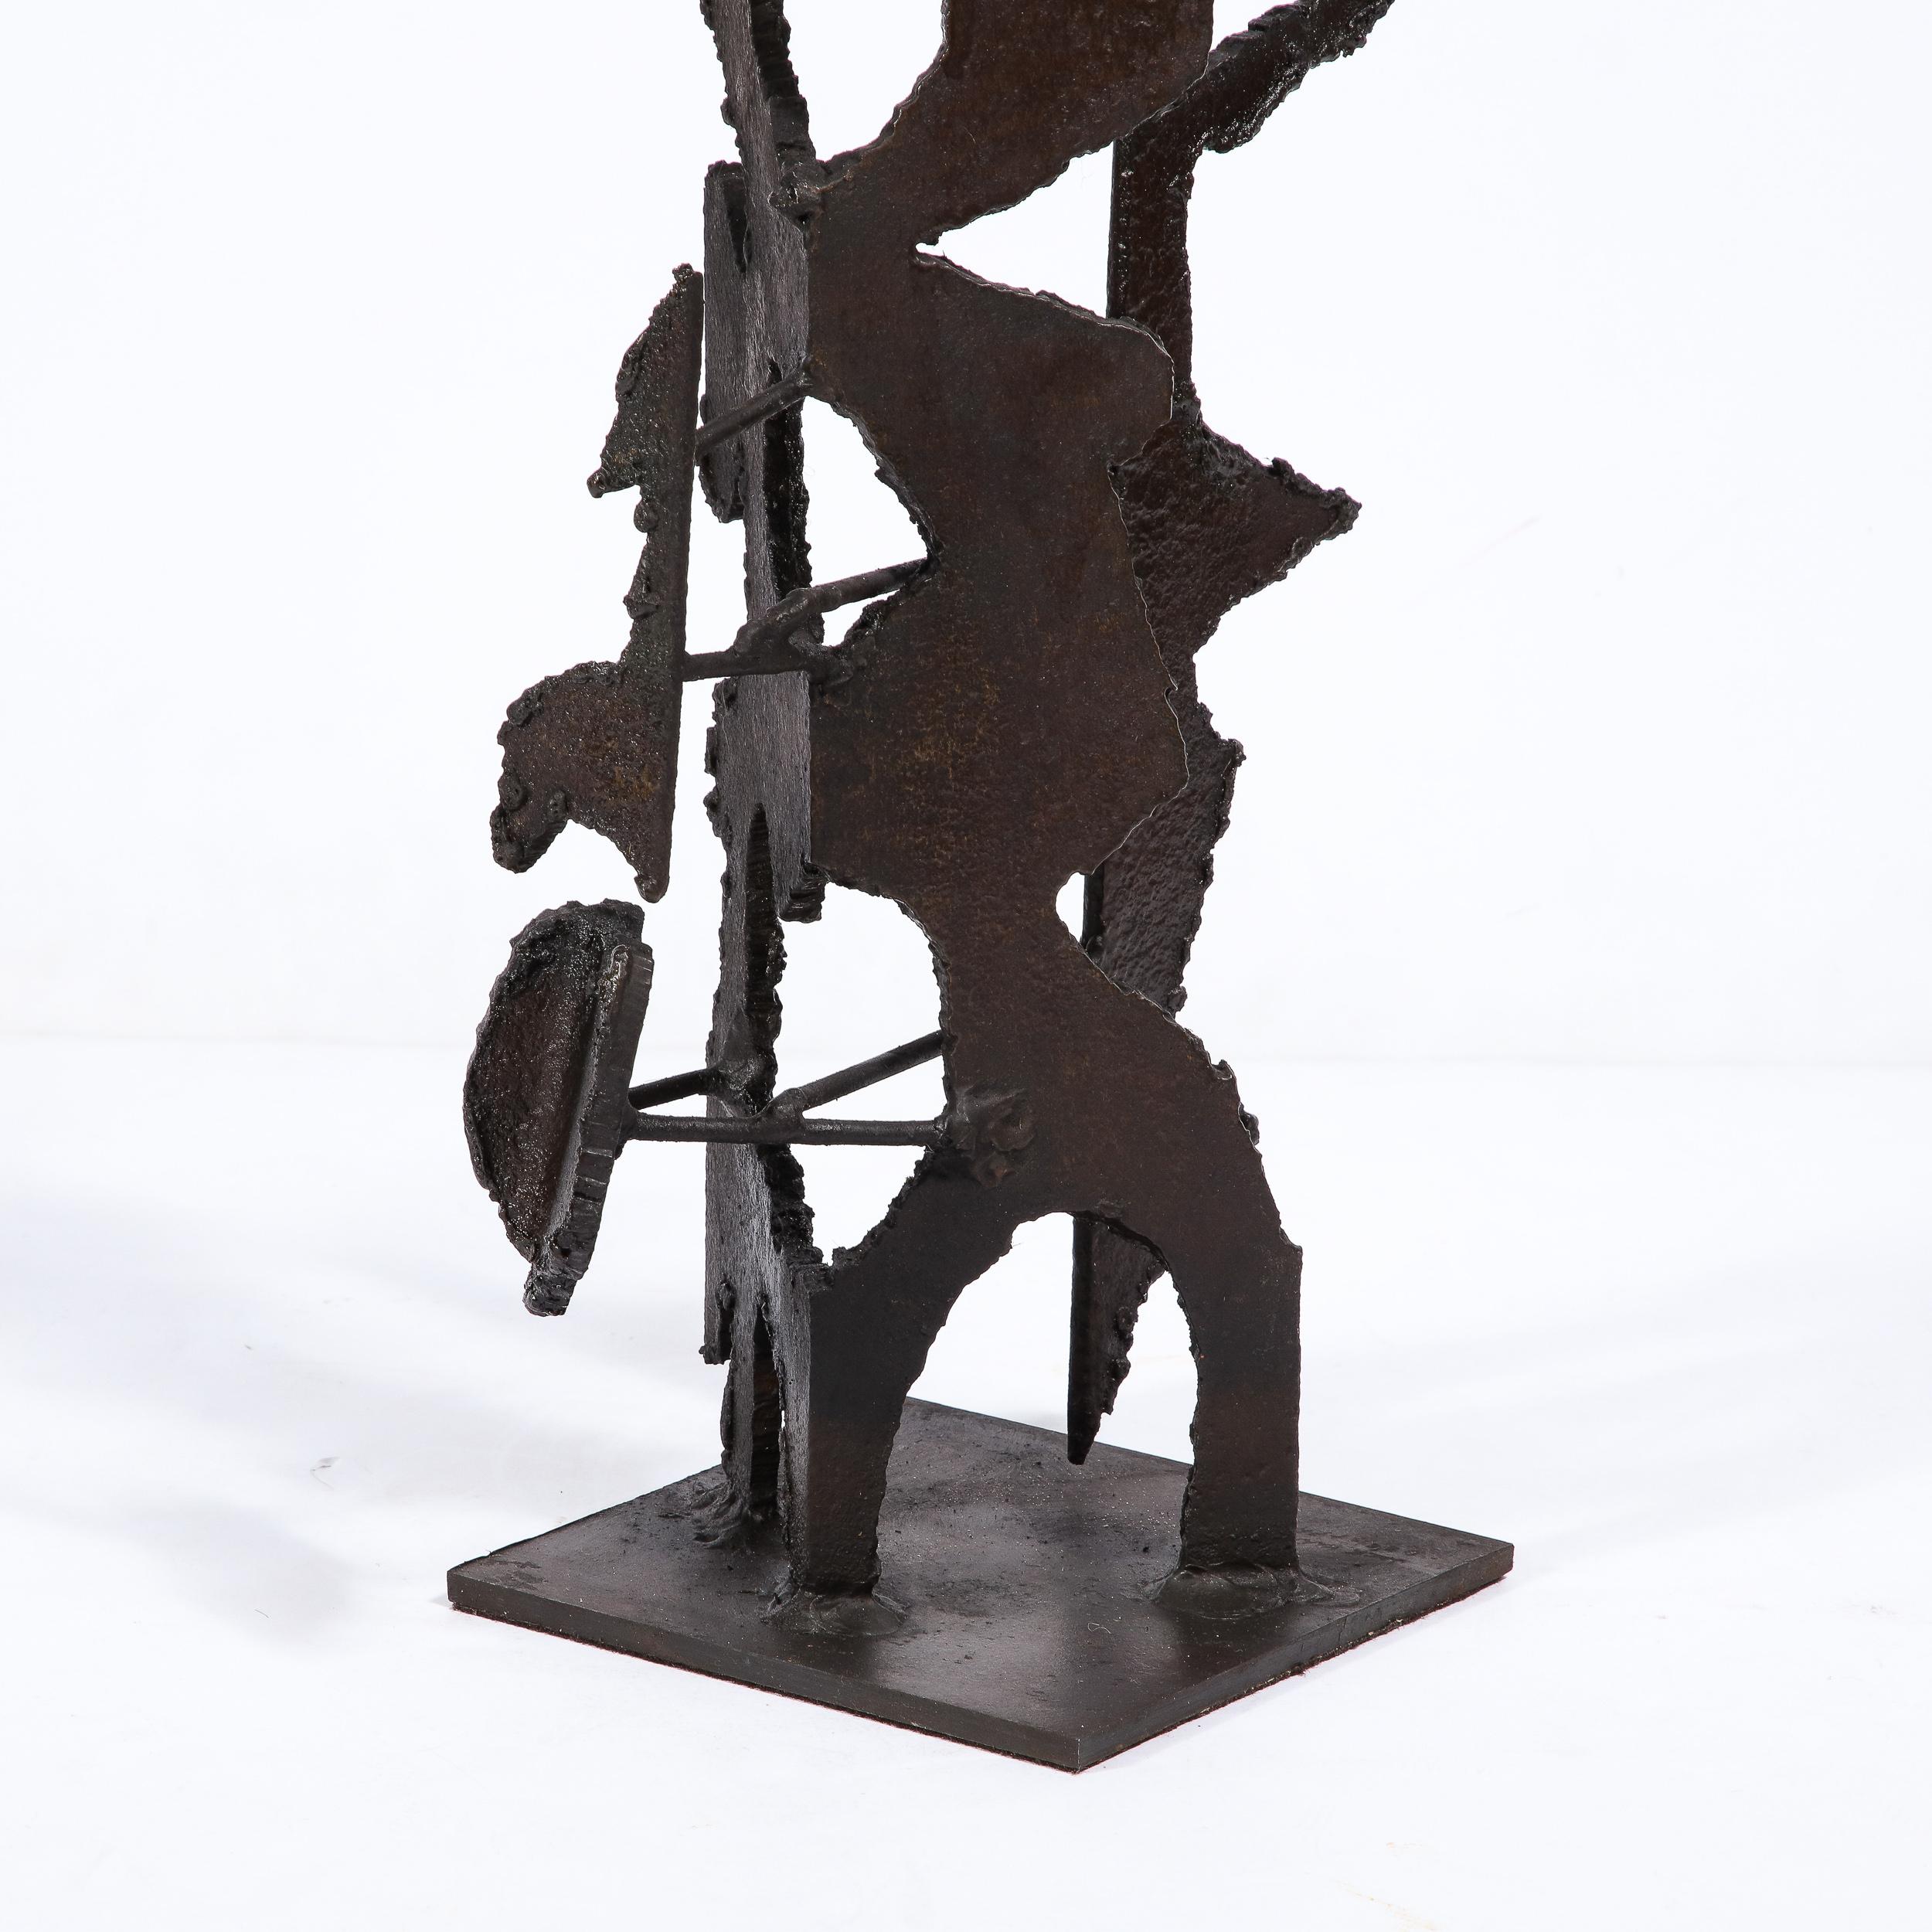 Late 20th Century Brutalist Steel Sculpture in Oil and Waxed Finish by Jan Van Deckter For Sale